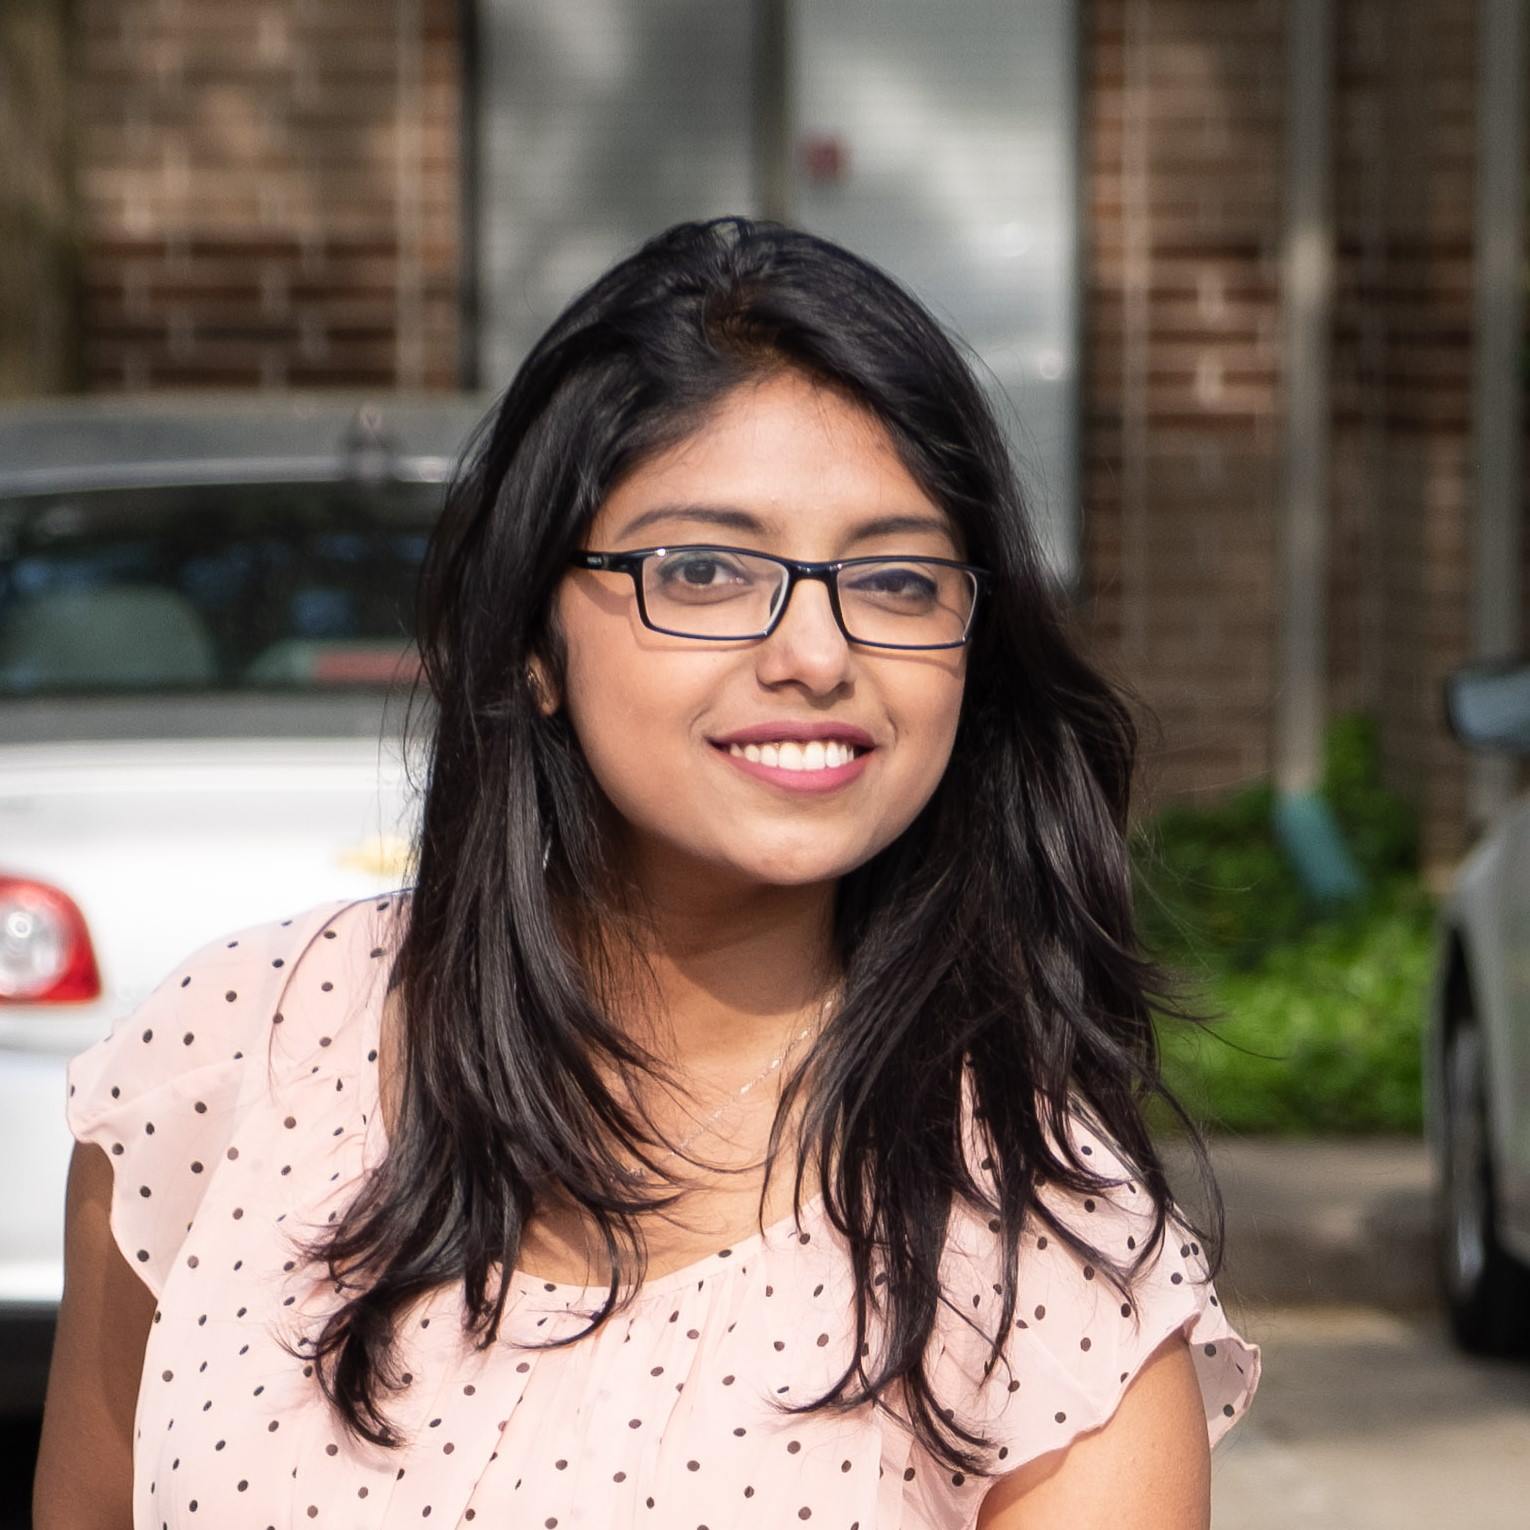 Maitraye, a young, Brown woman with black shoulder-length straight hair, is smiling at the camera. She is wearing square glasses and a peach-colored polka-dotted dress. Background shows a car in front of a red wall.